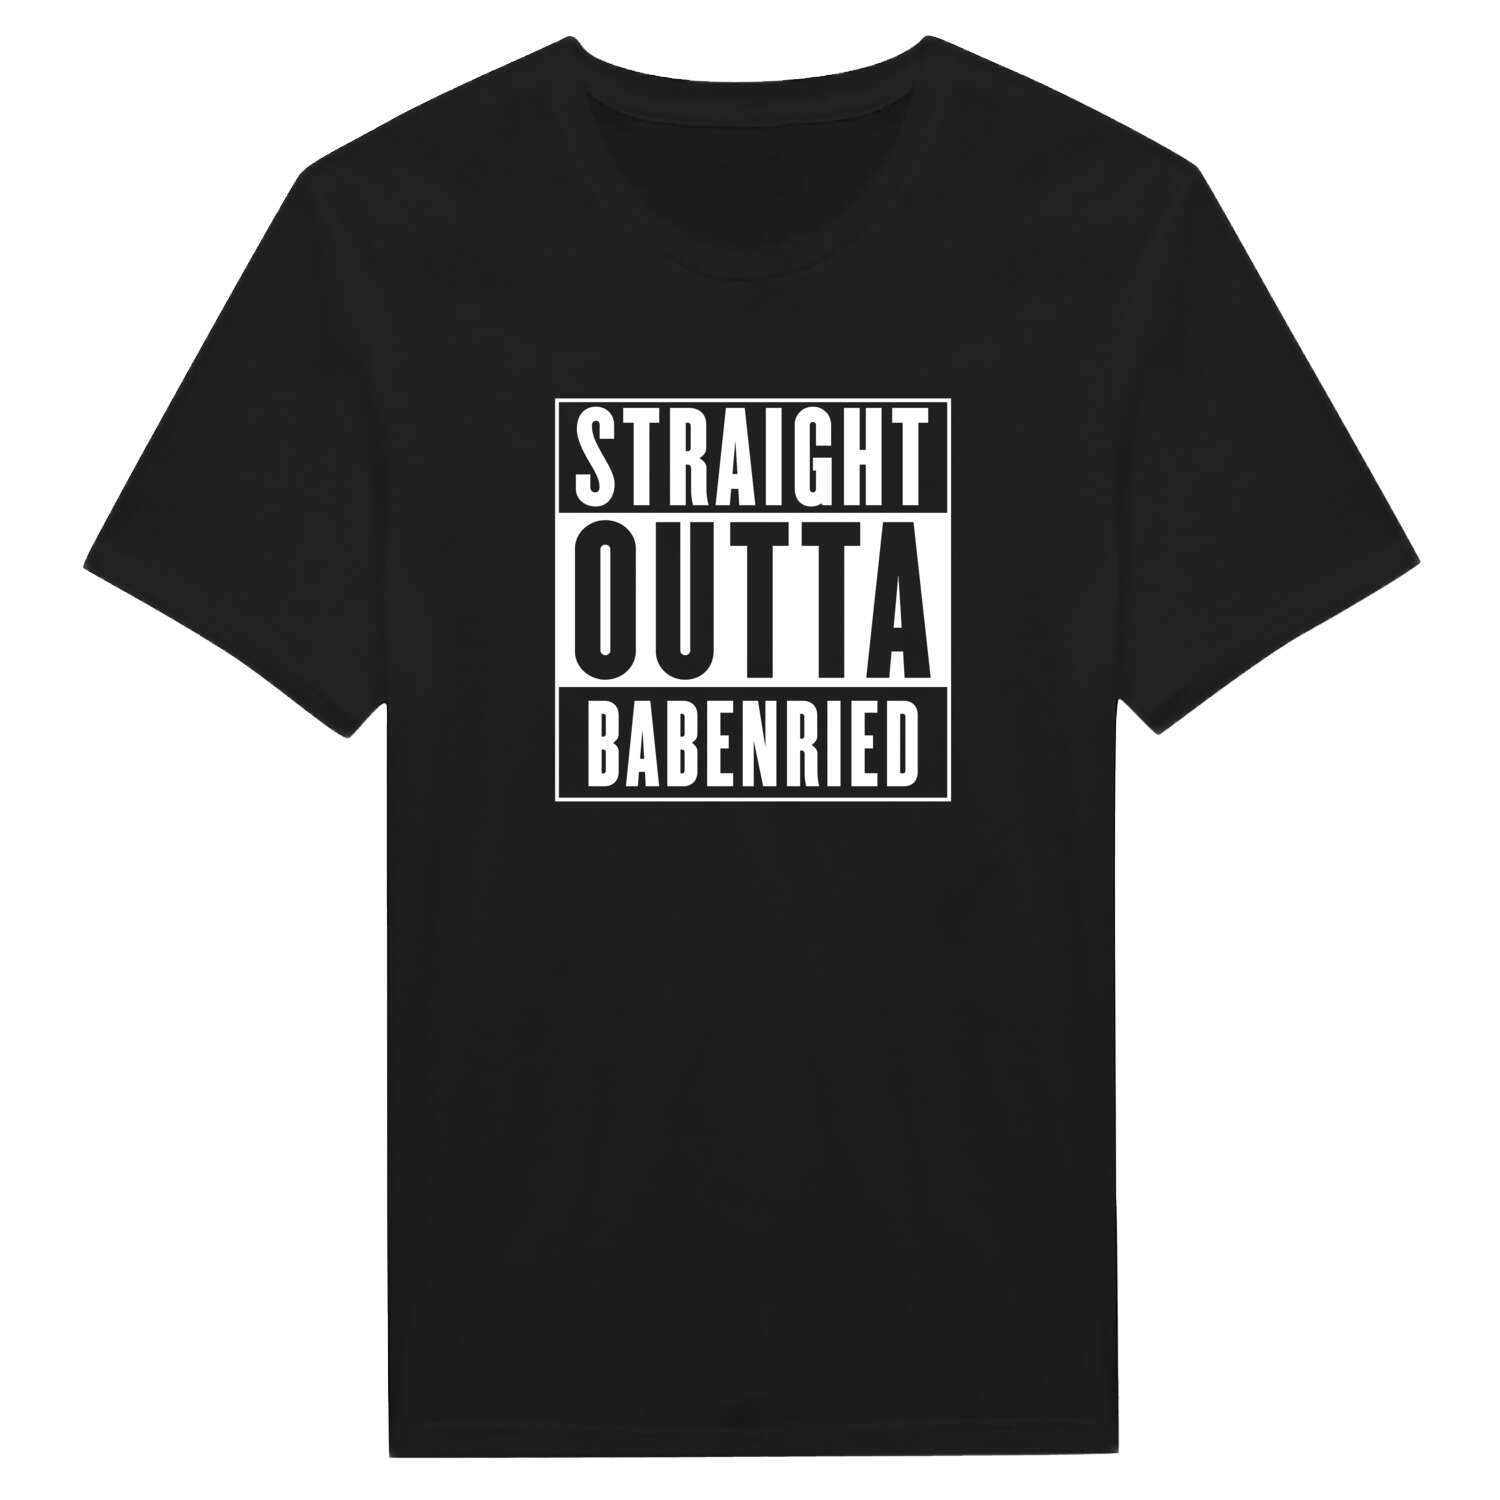 Babenried T-Shirt »Straight Outta«